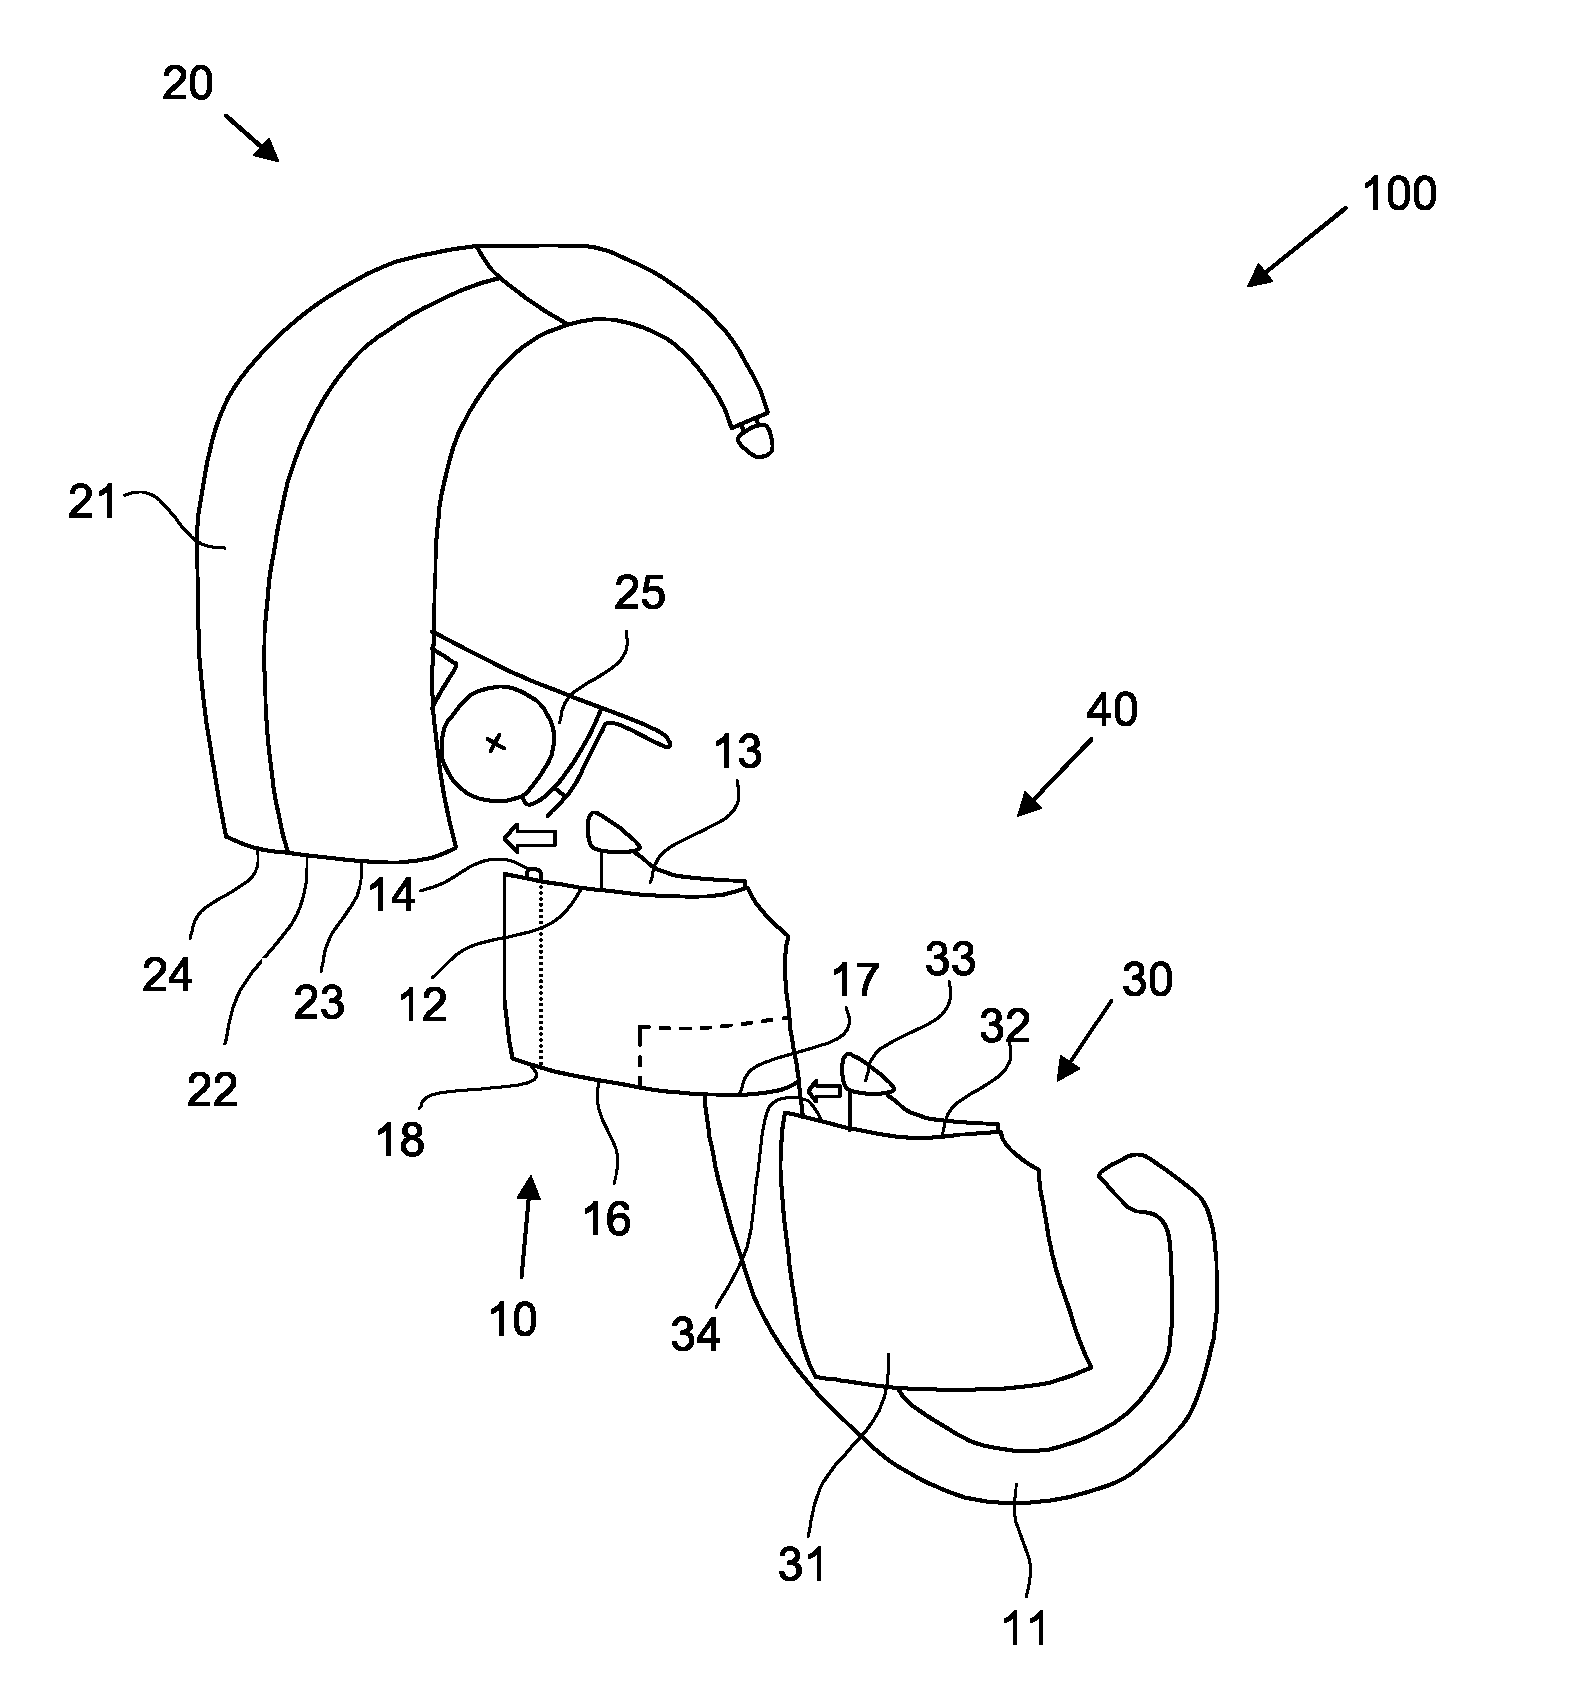 Hearing aid retainer accessory